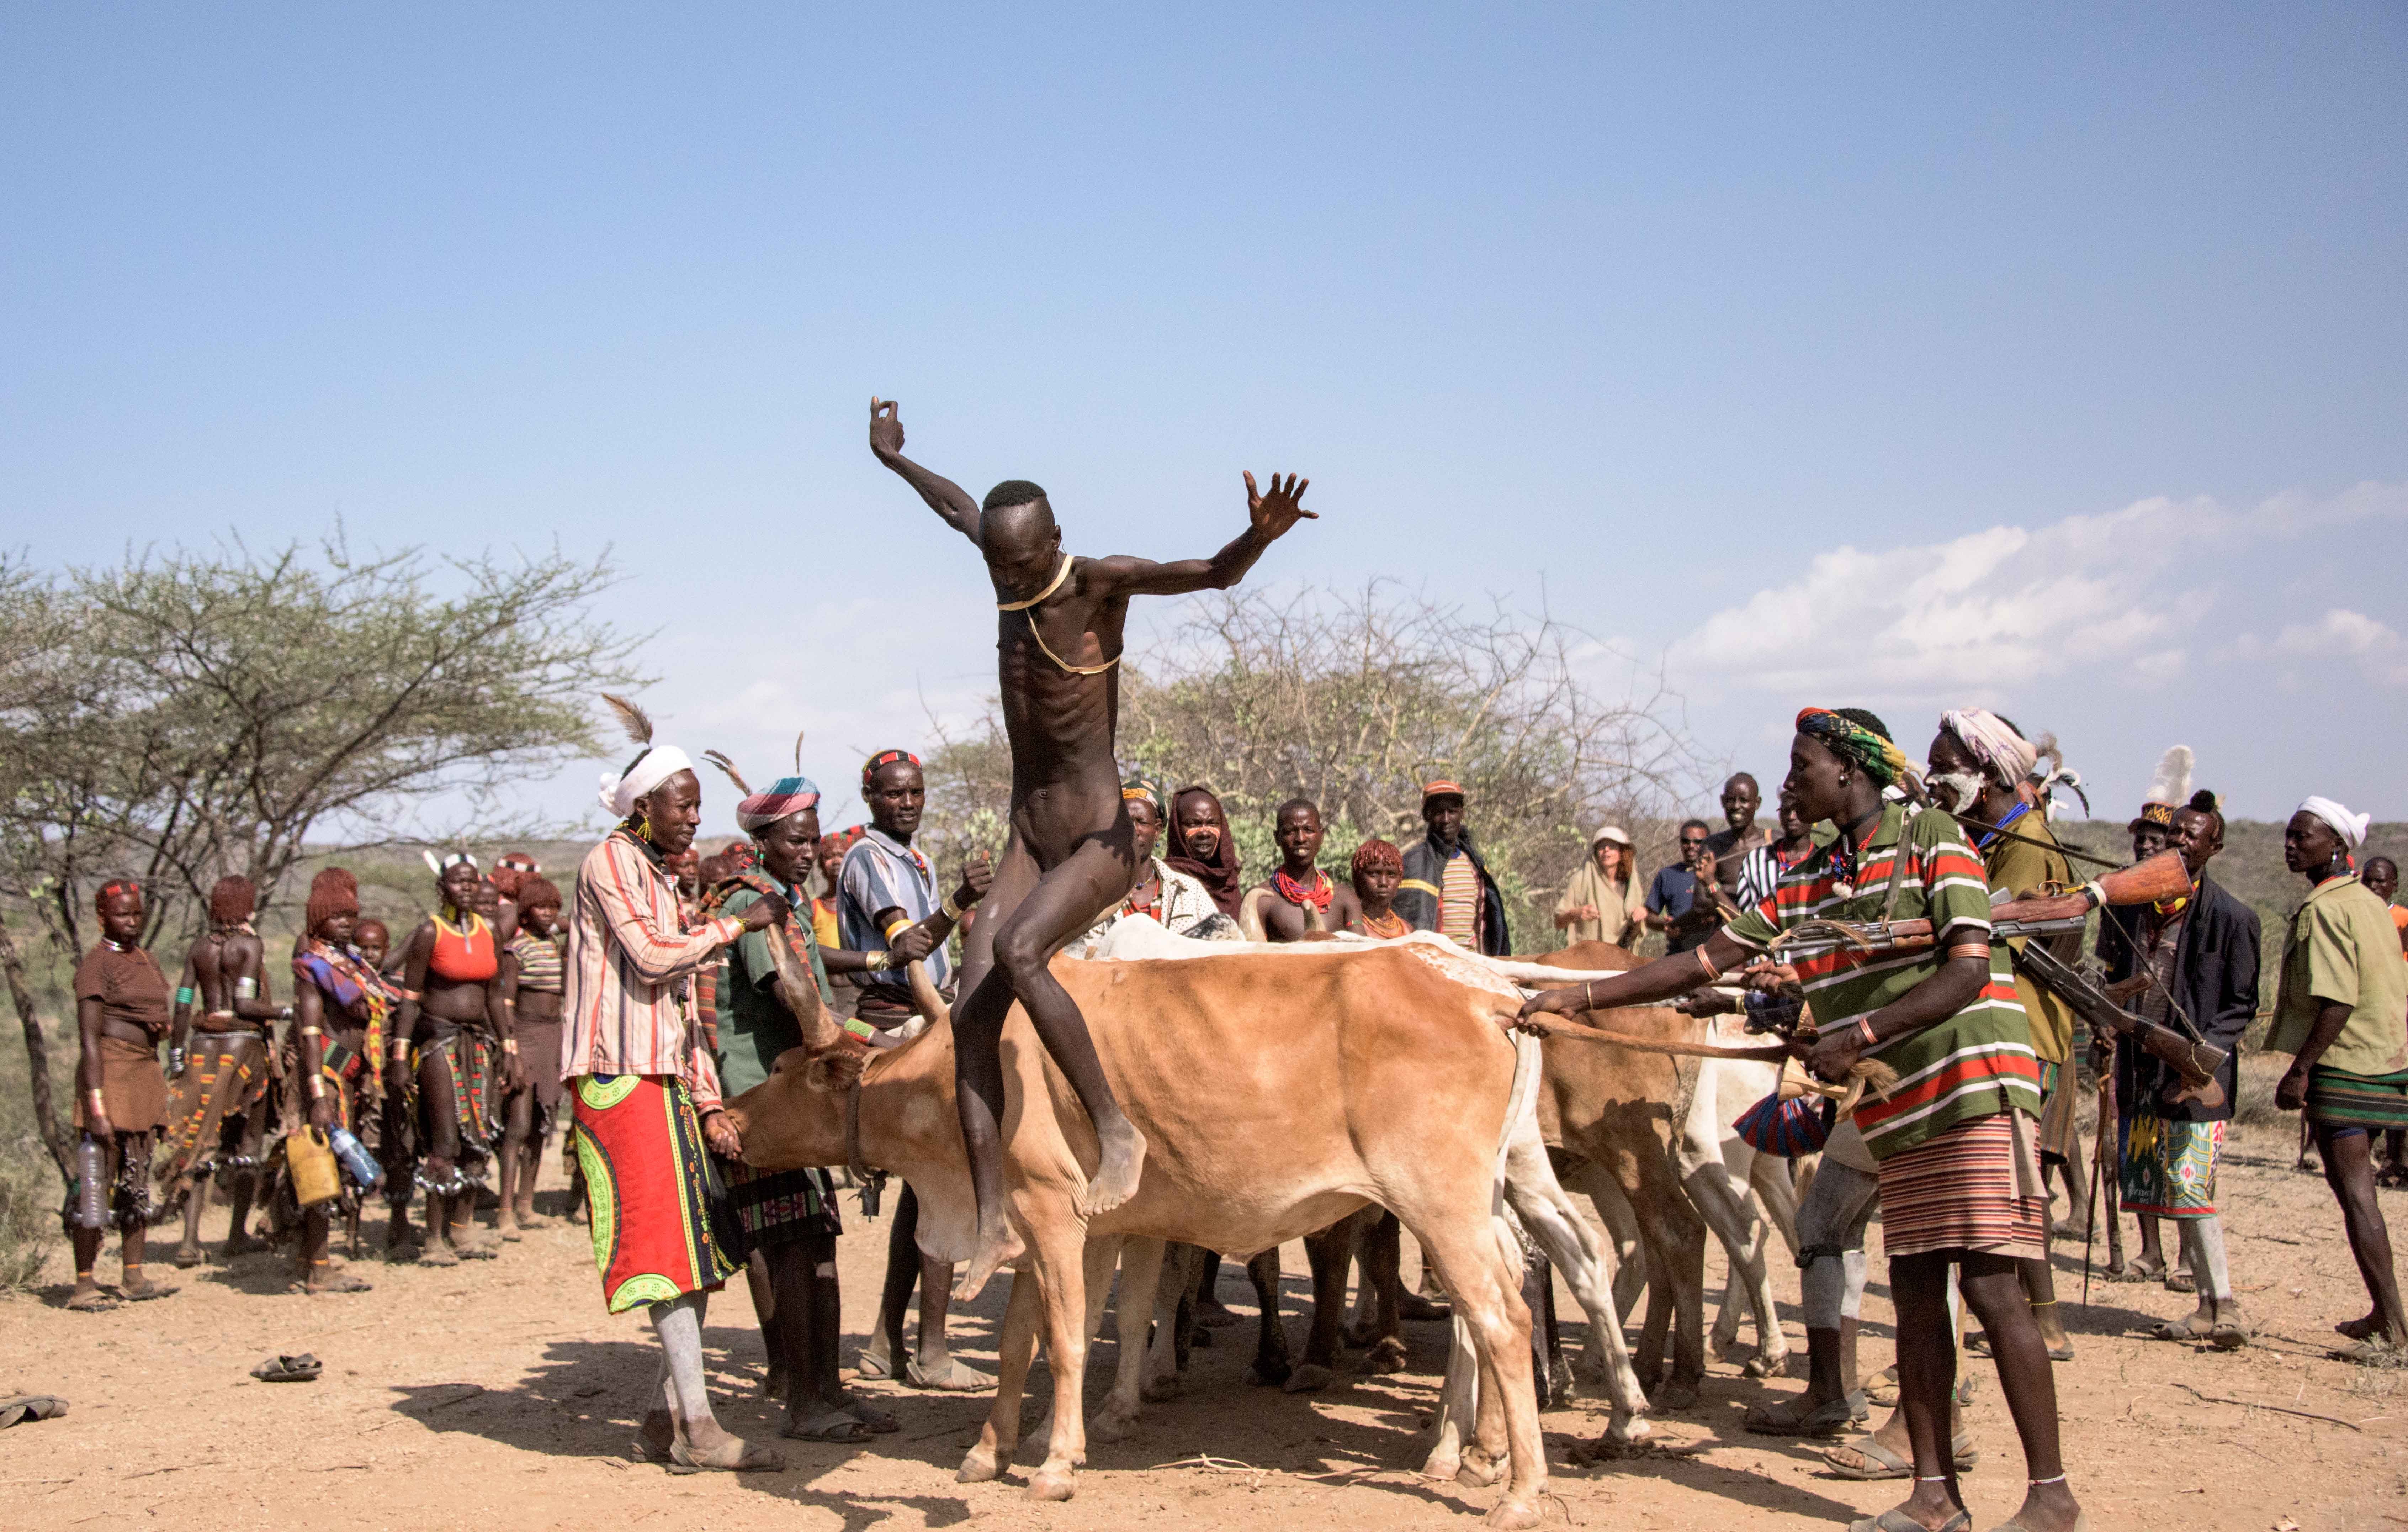 Ethiopian Coming Of Age Tradition Hamar Cow Jumping All About Cow Photos